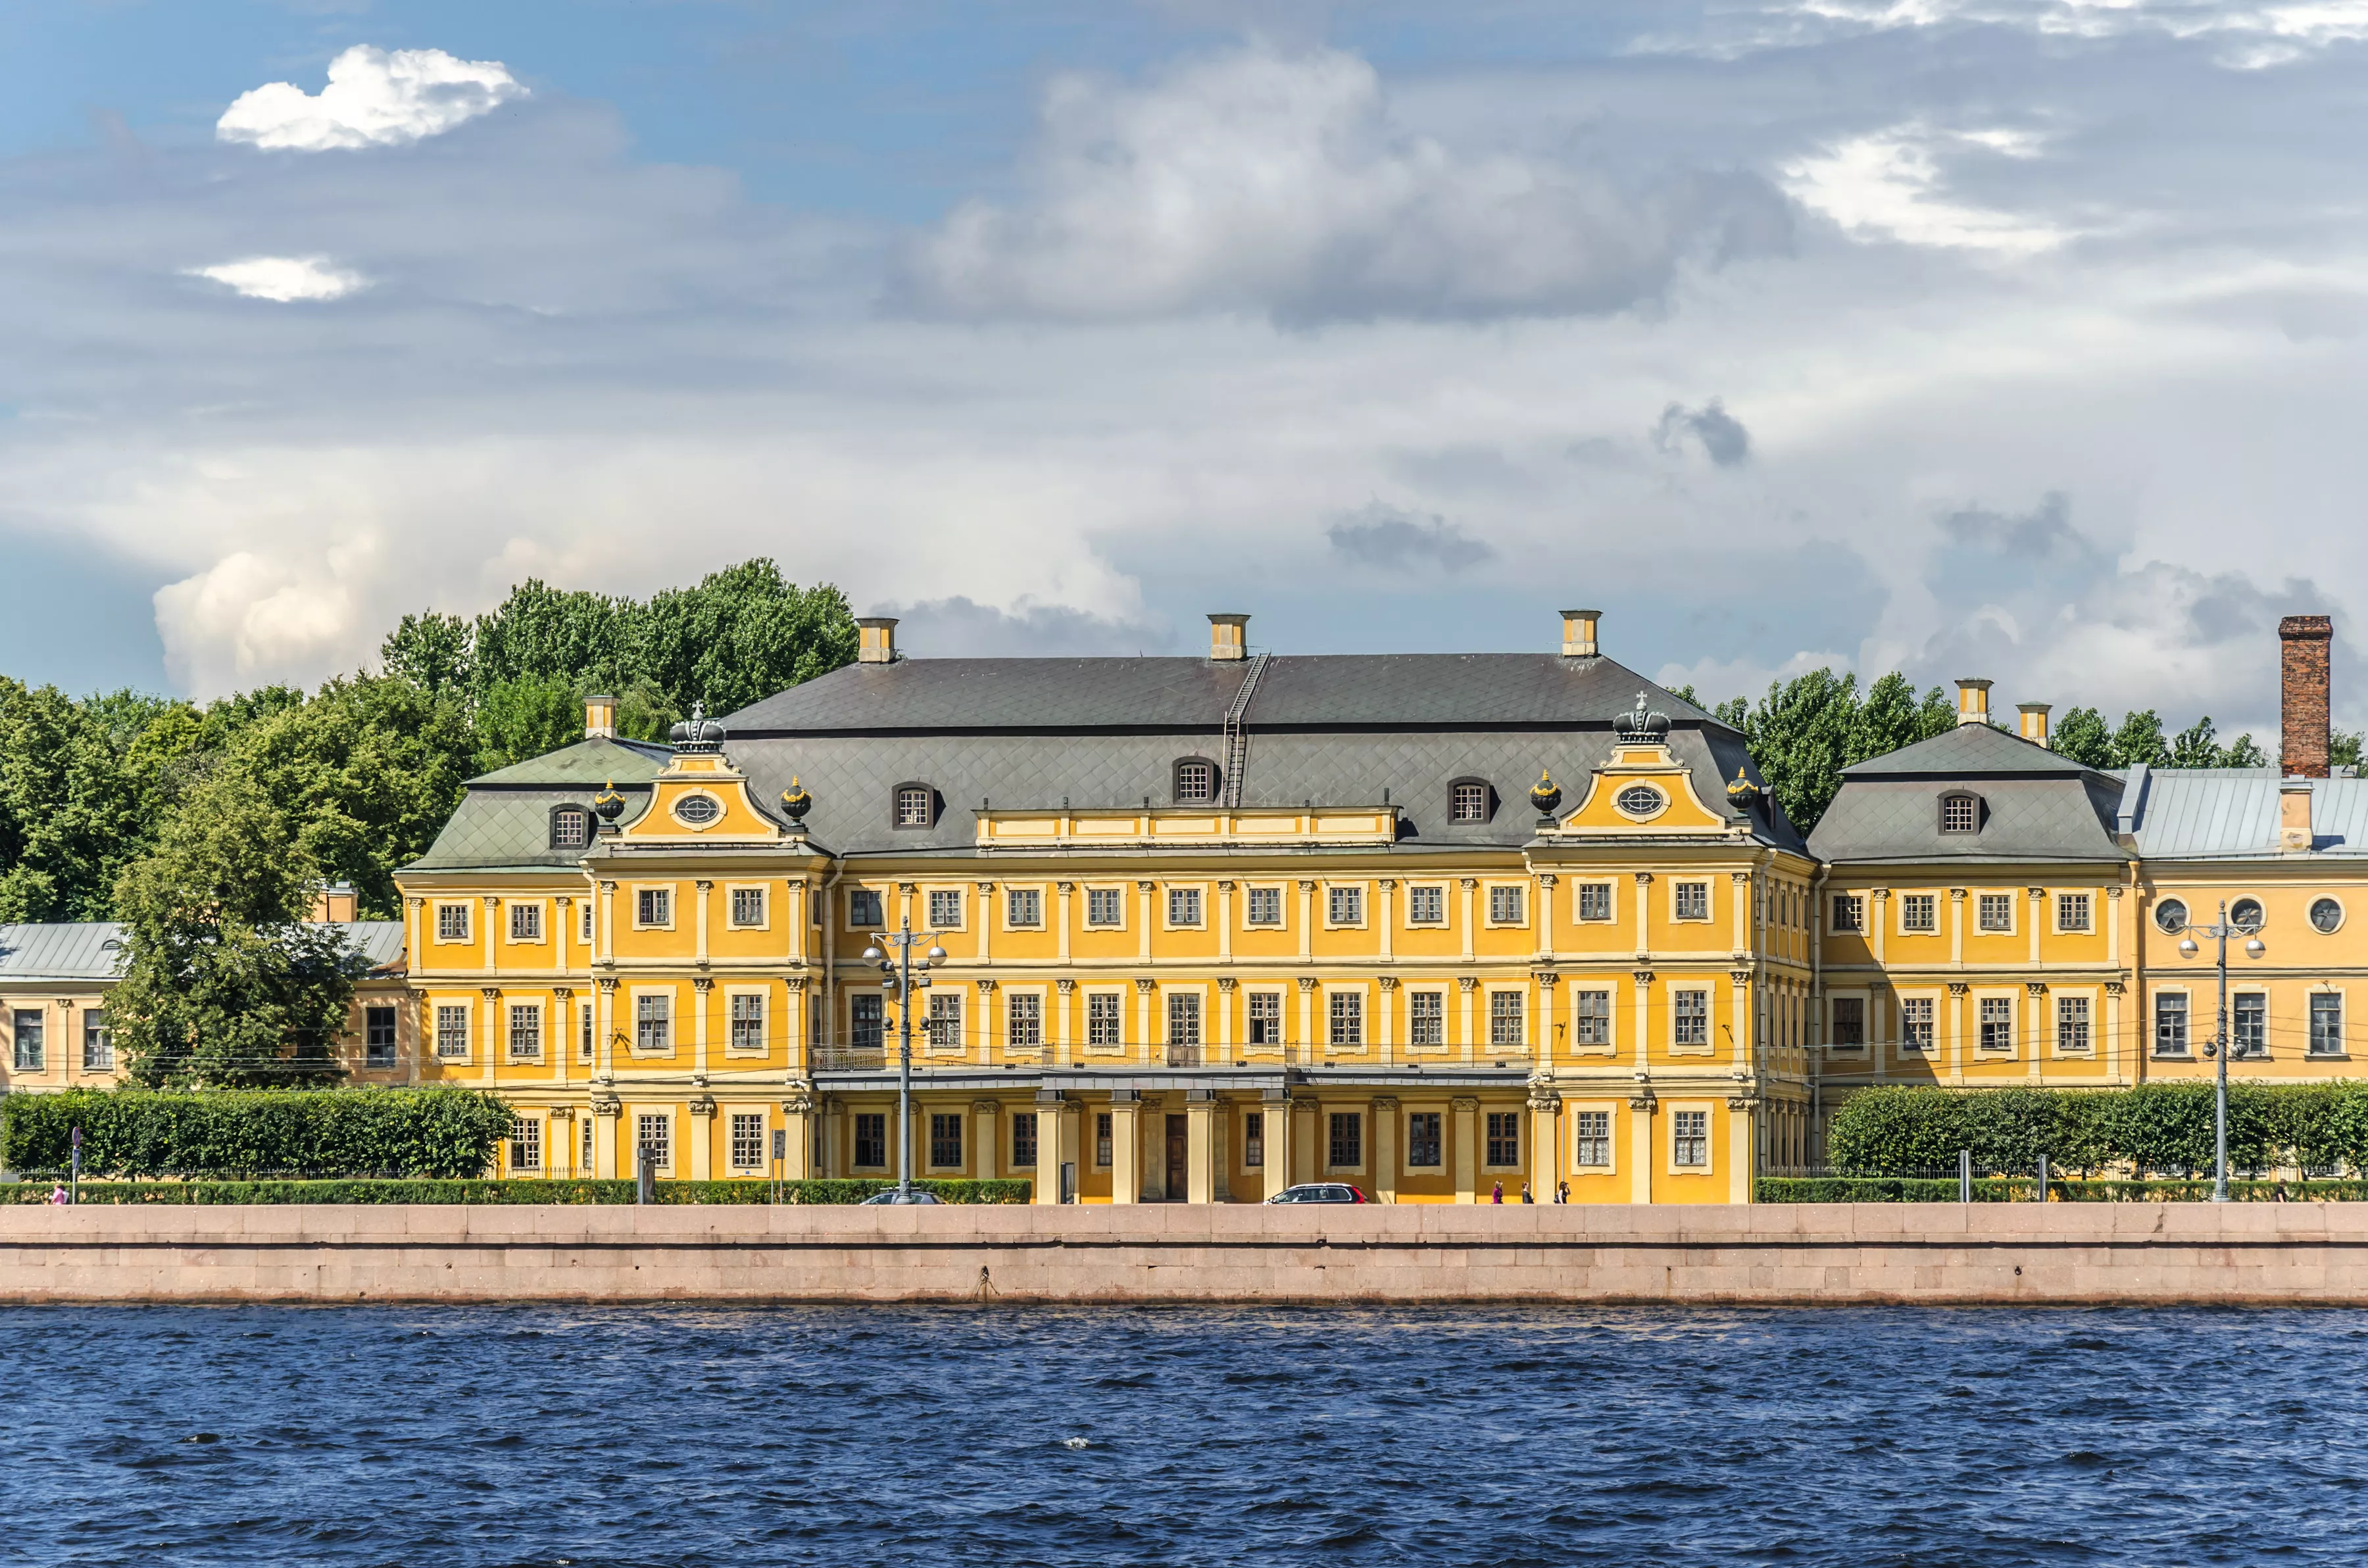 Menshikov Palace in Russia, Europe | Art Galleries - Rated 3.8